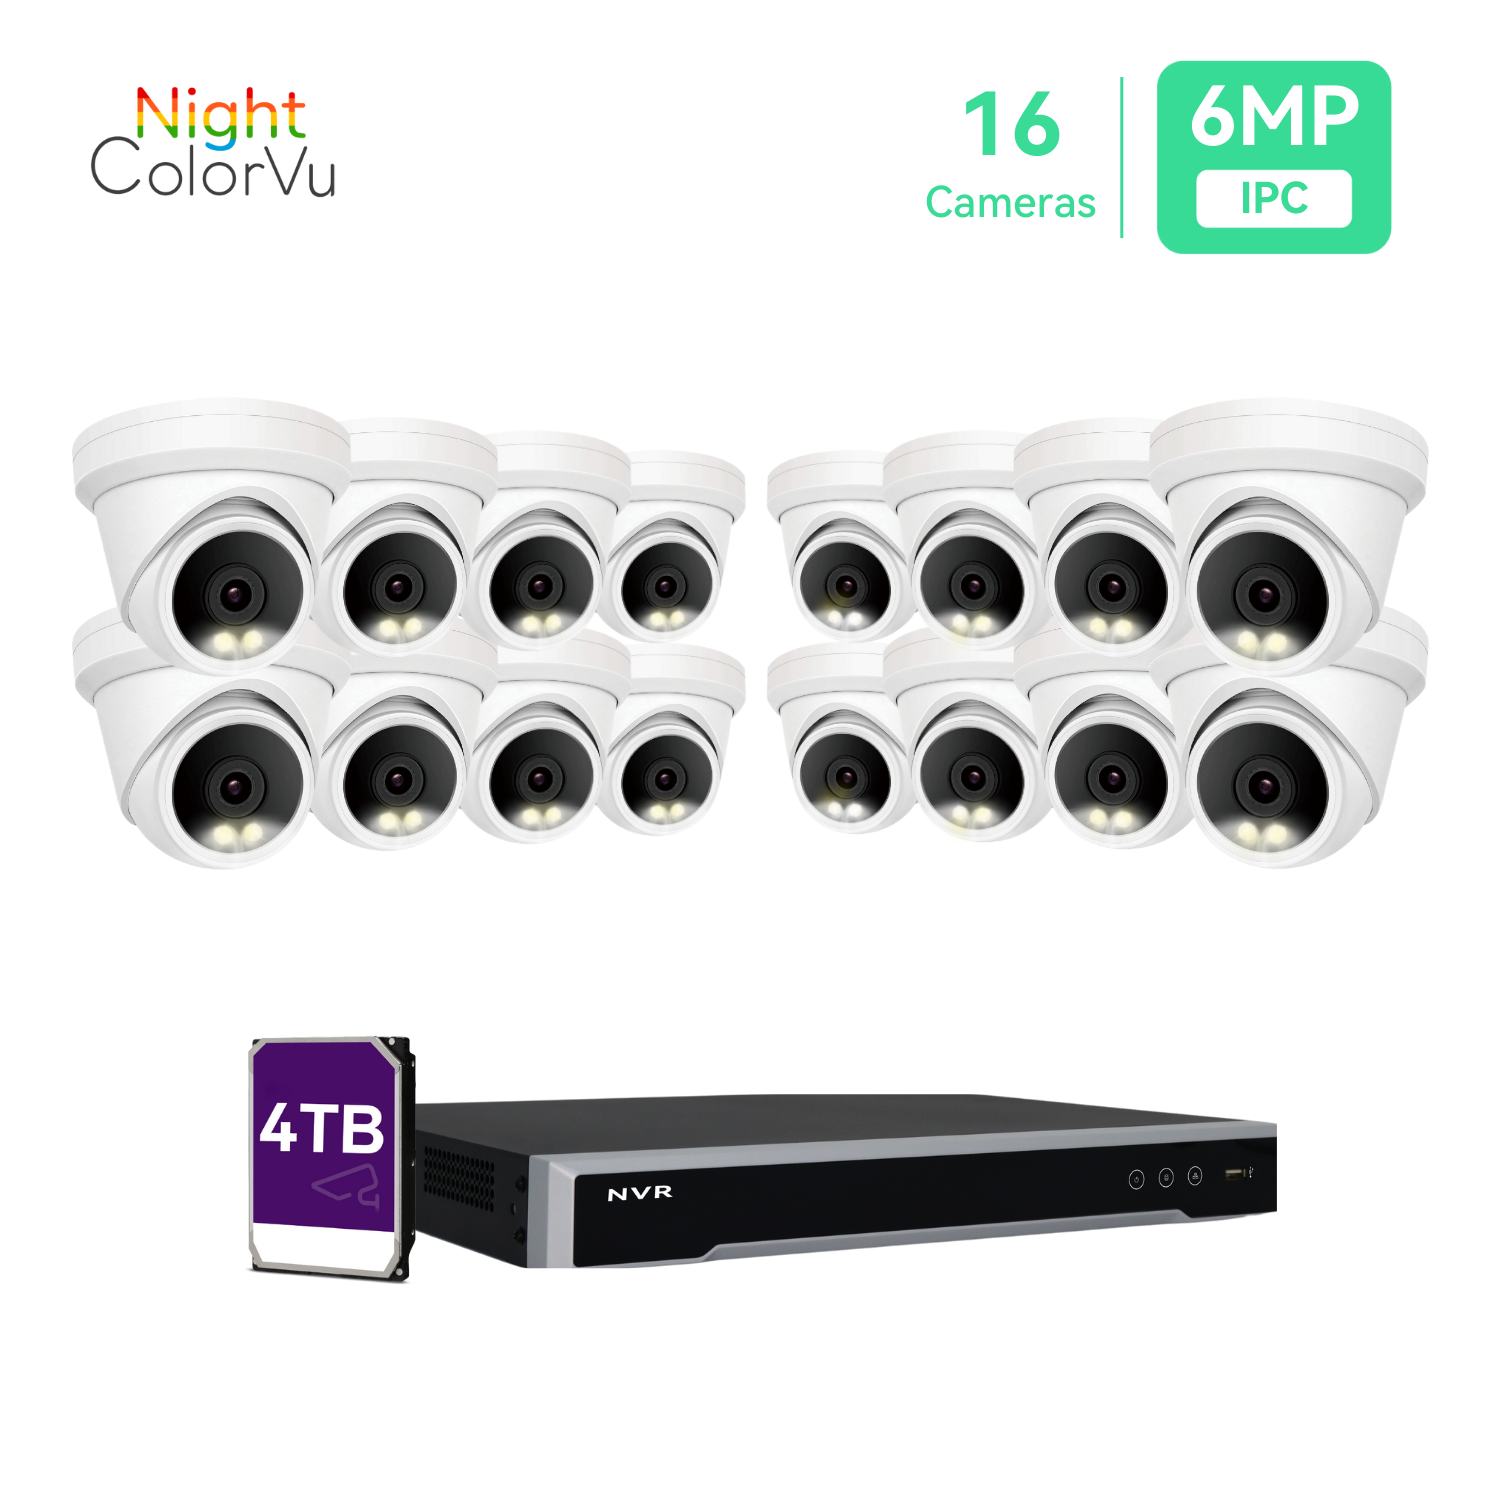 16CH 4K PoE IP Camera System with (16)6MP Night ColorVu Turret Cameras, 4TB HDD